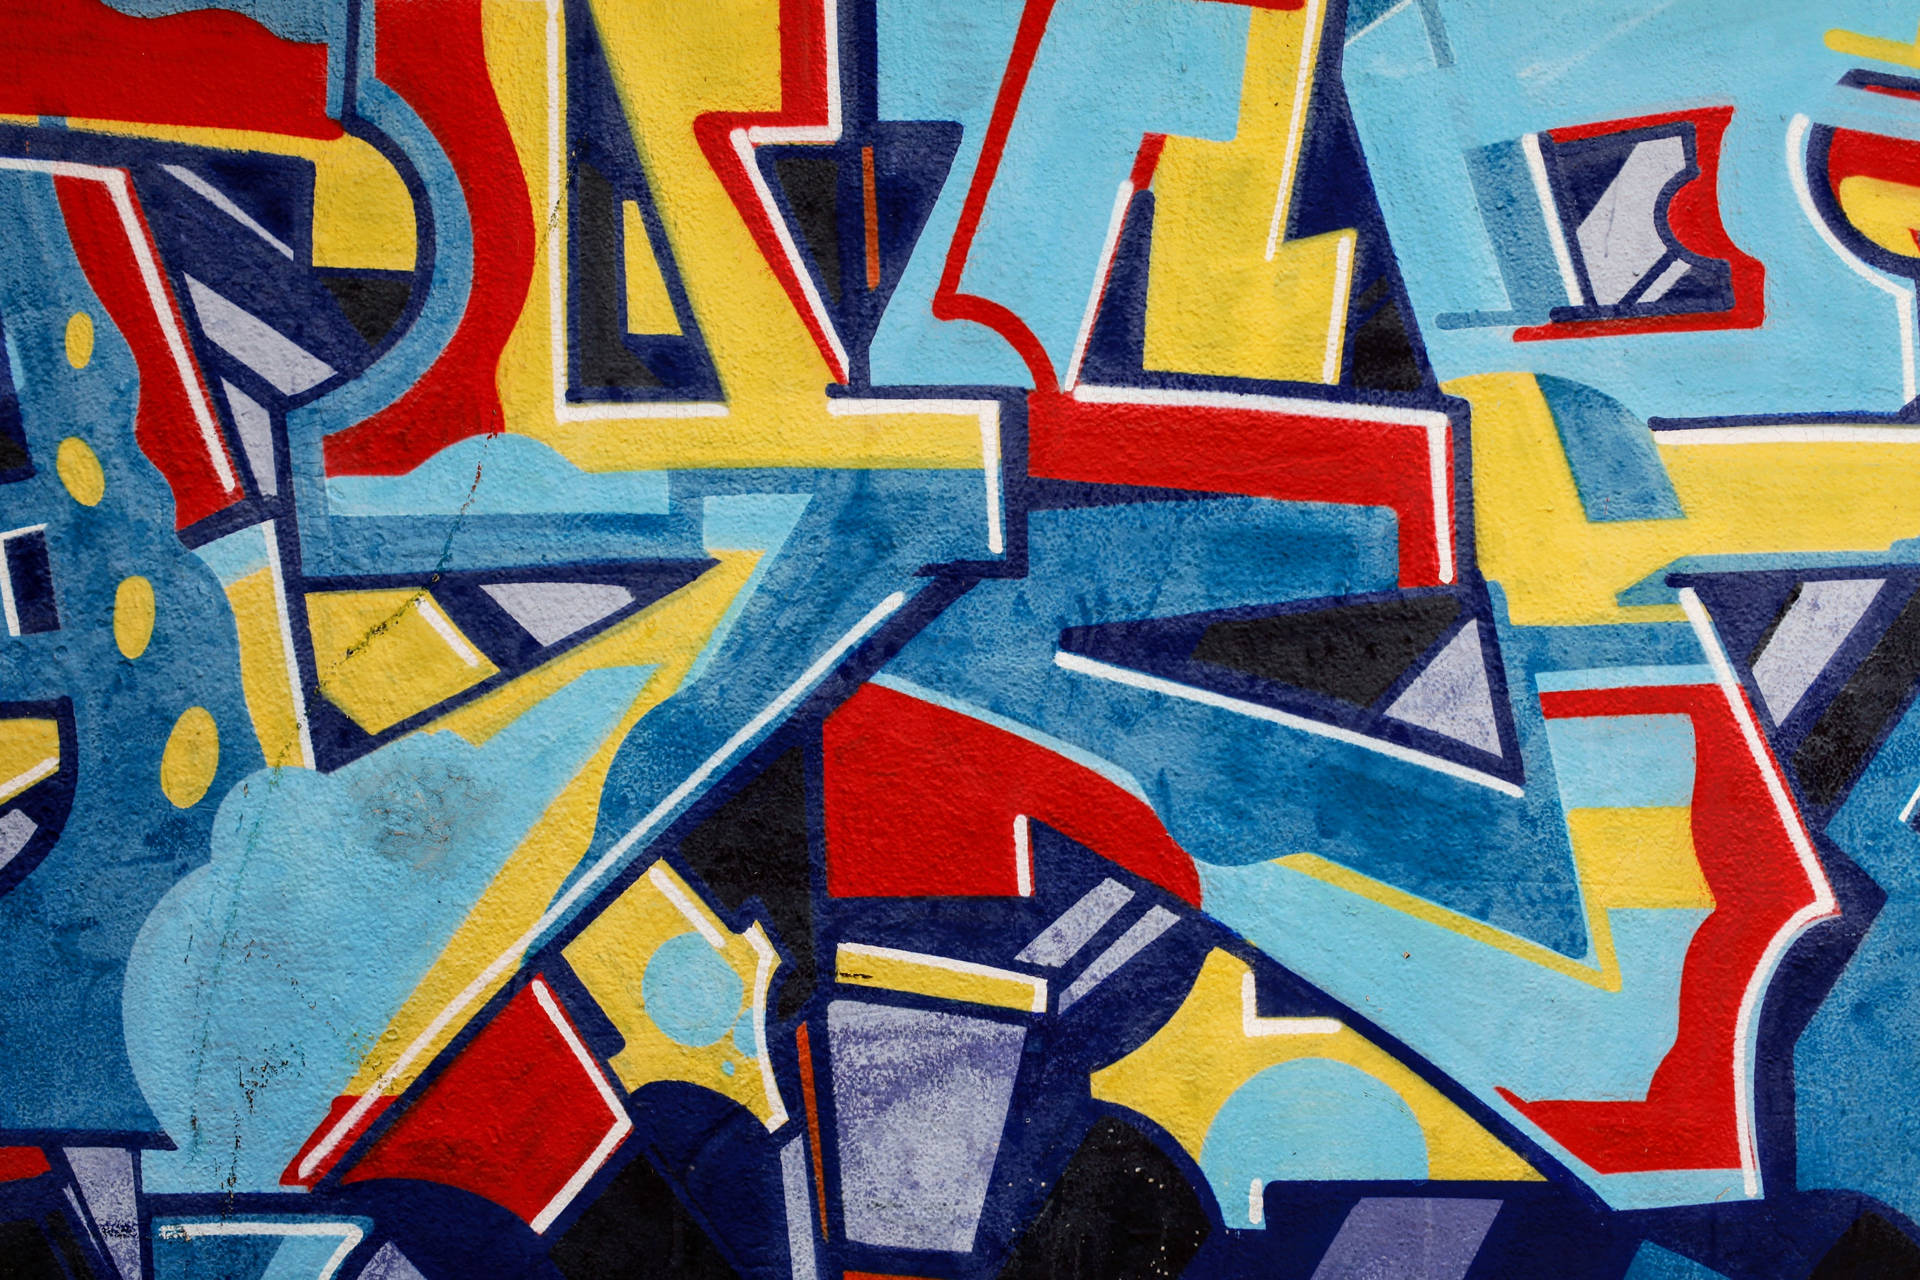 Graffiti wallpaper of blue yellow and red colors abstract with rough texture.